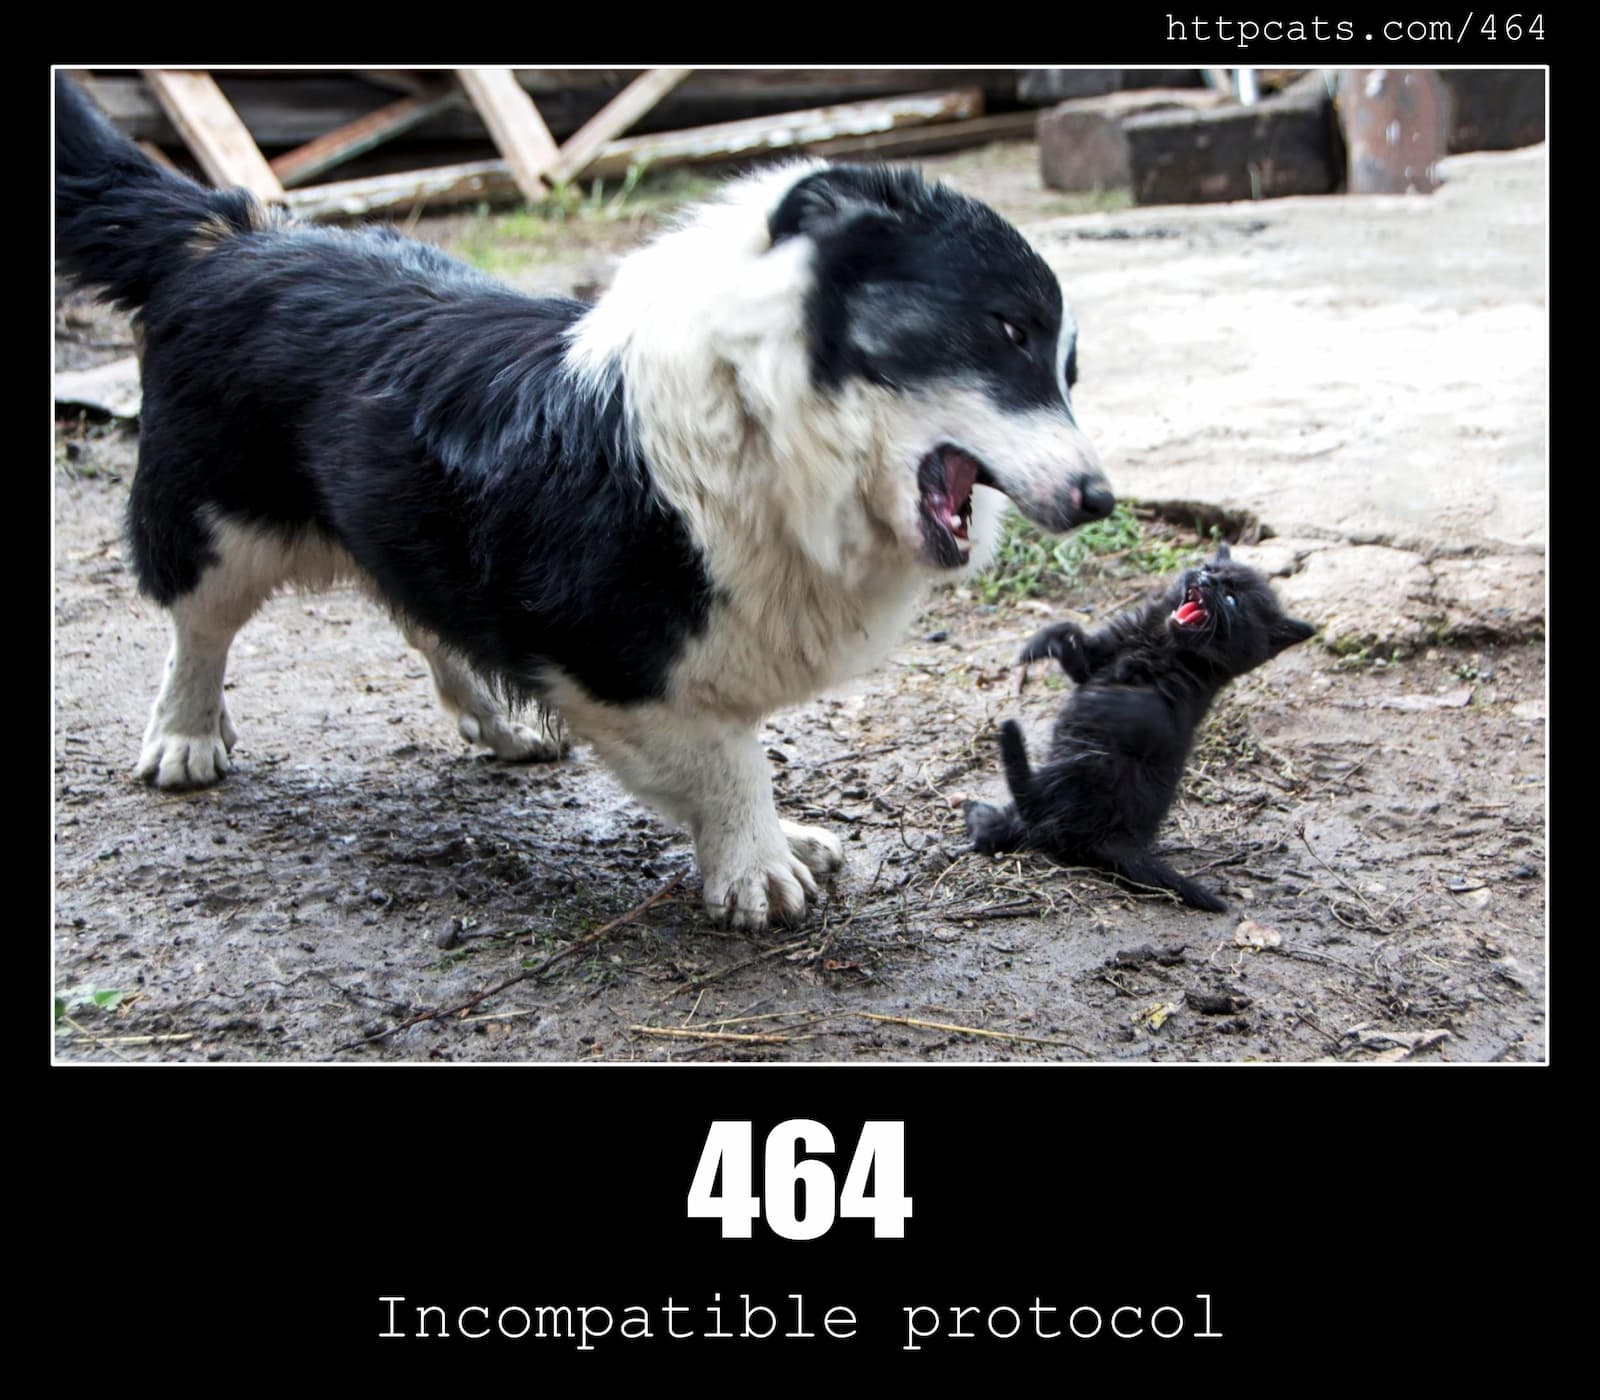 HTTP Status Code 464 Incompatible protocol & Cats